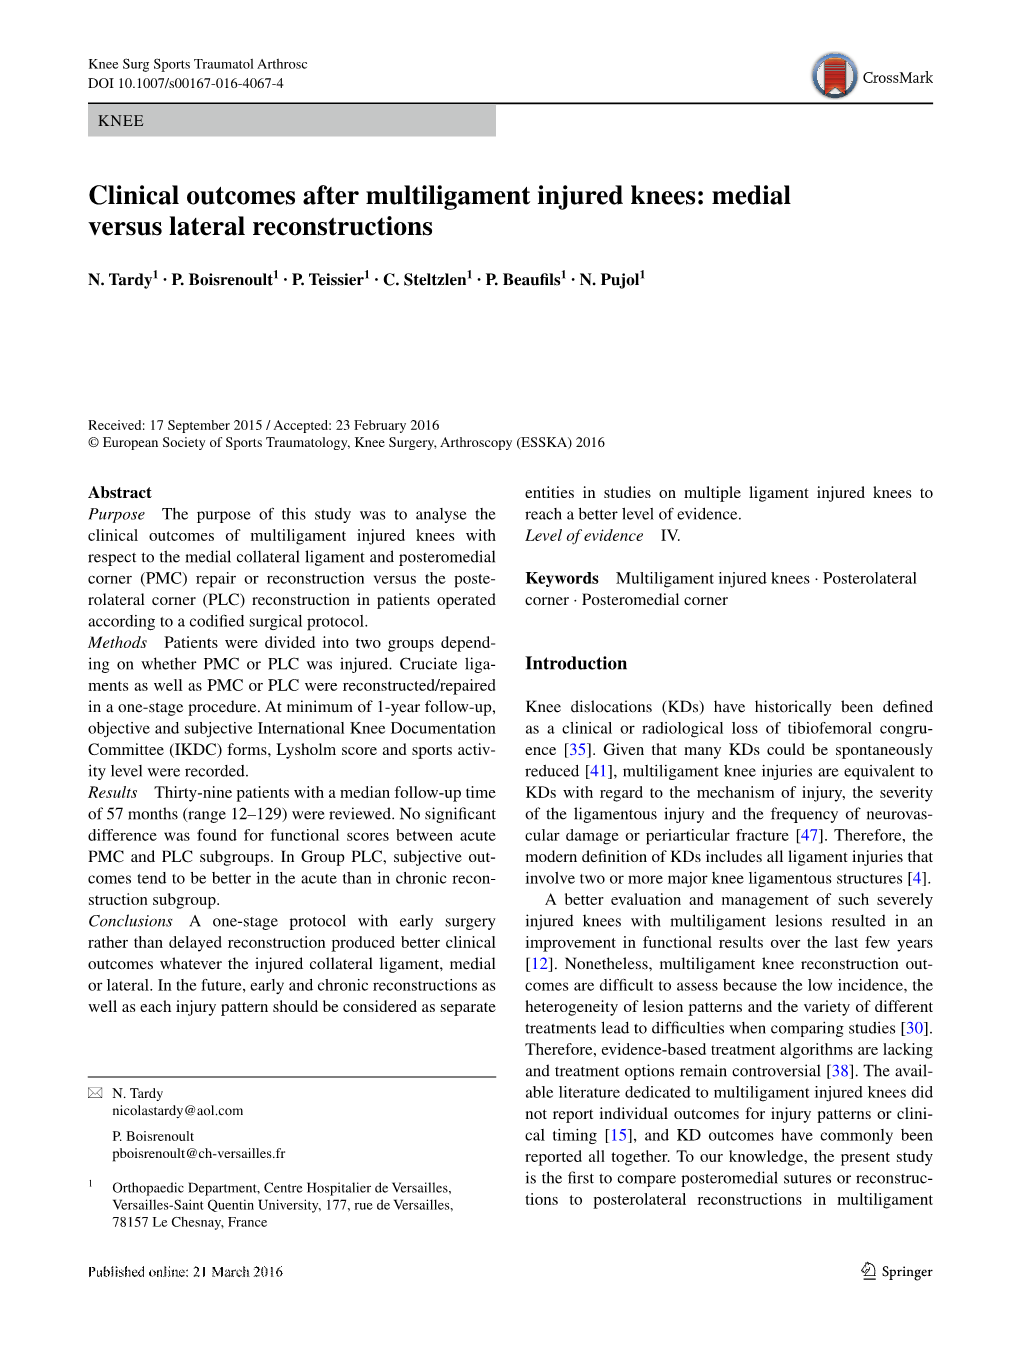 Clinical Outcomes After Multiligament Injured Knees: Medial Versus Lateral Reconstructions